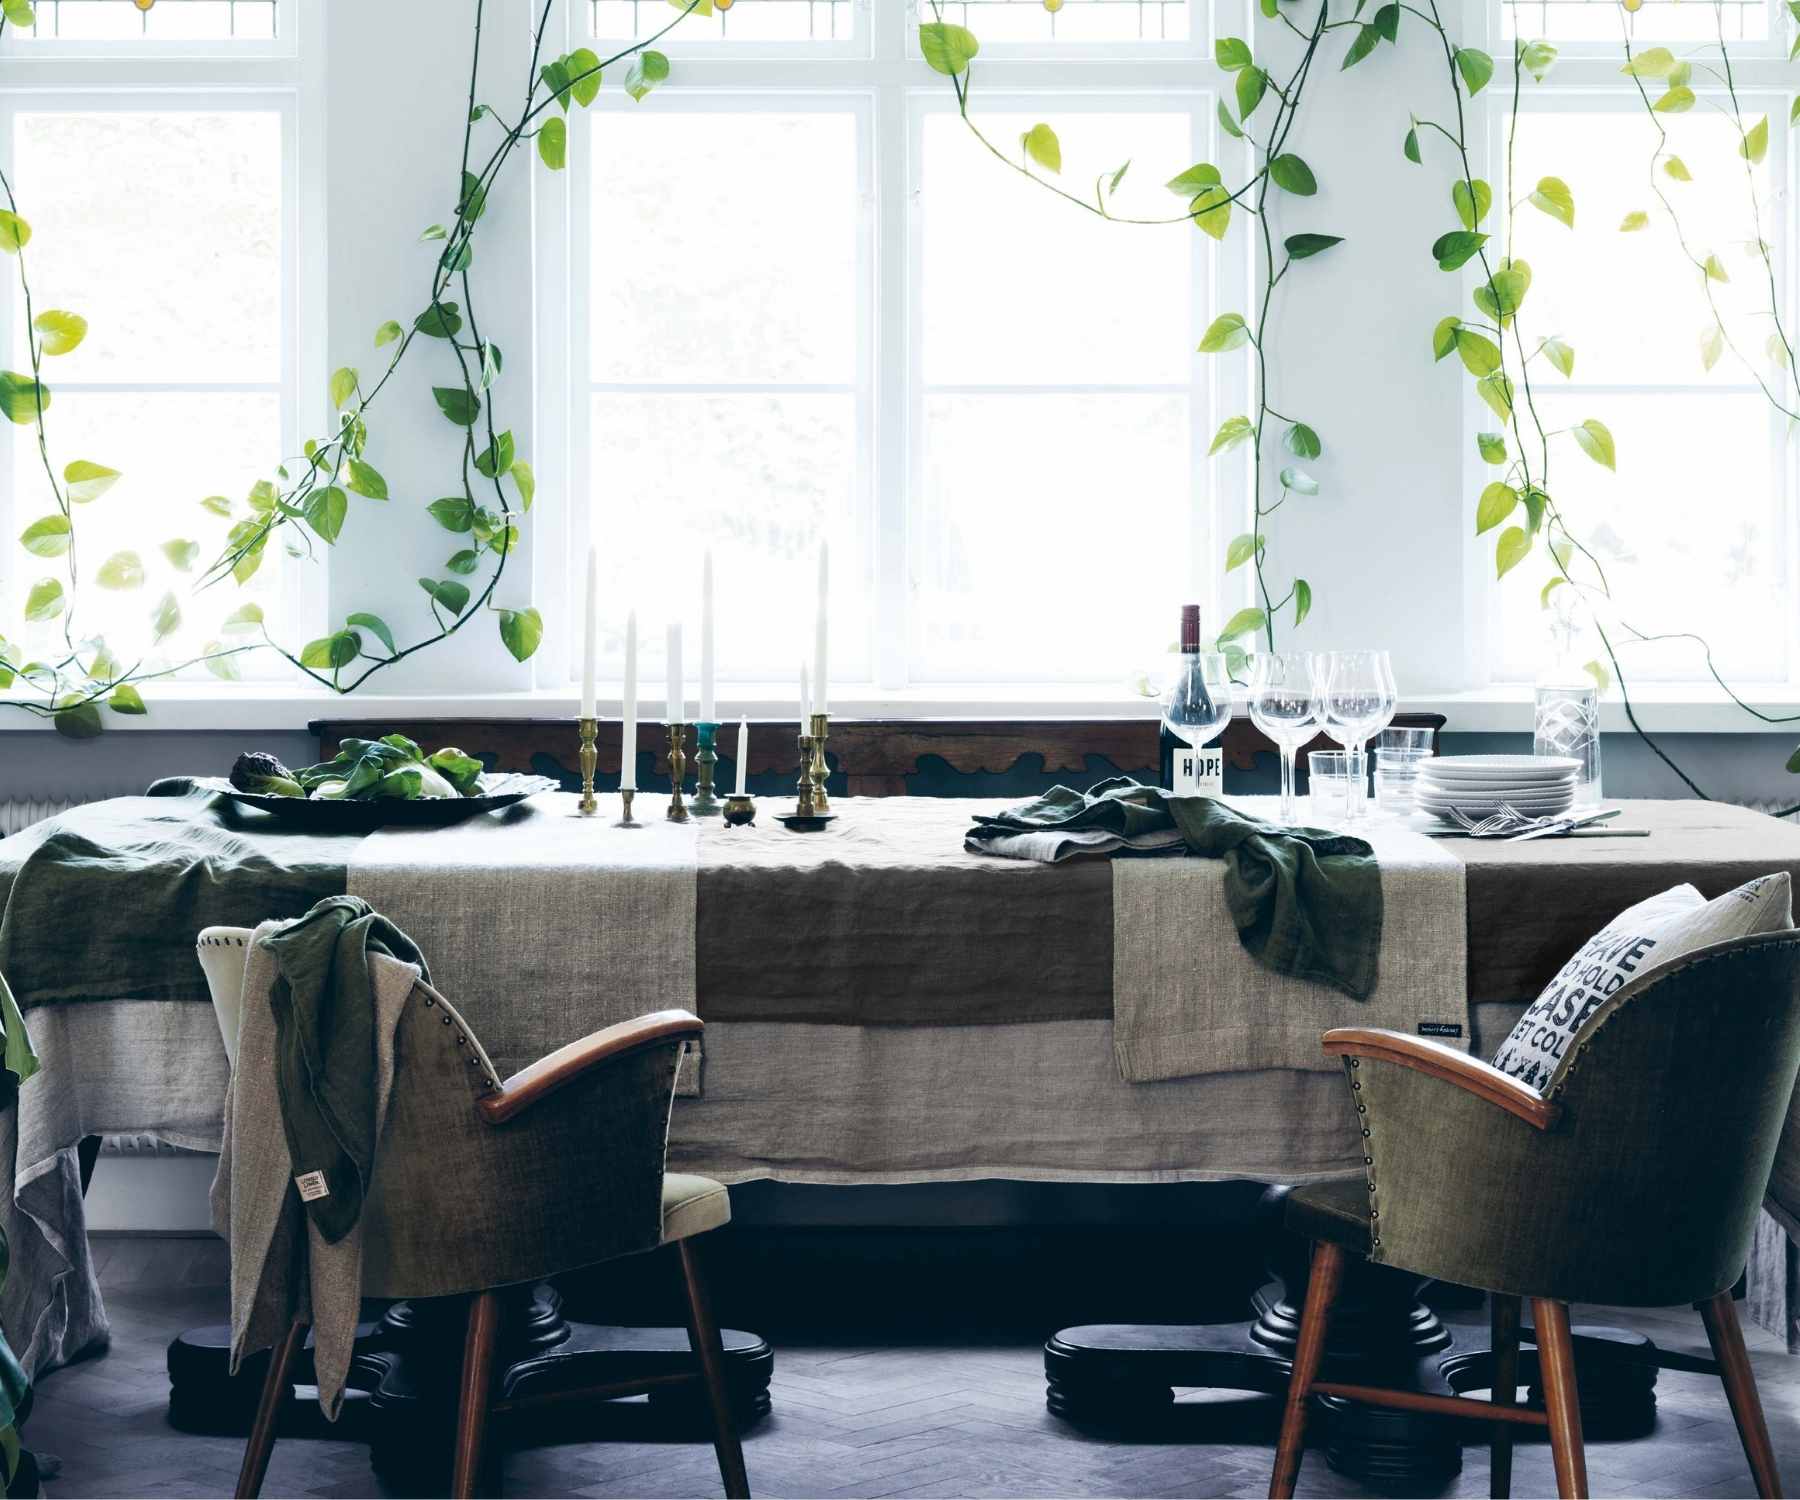 Dining table with layered linen tablecloths in front of large bright windows